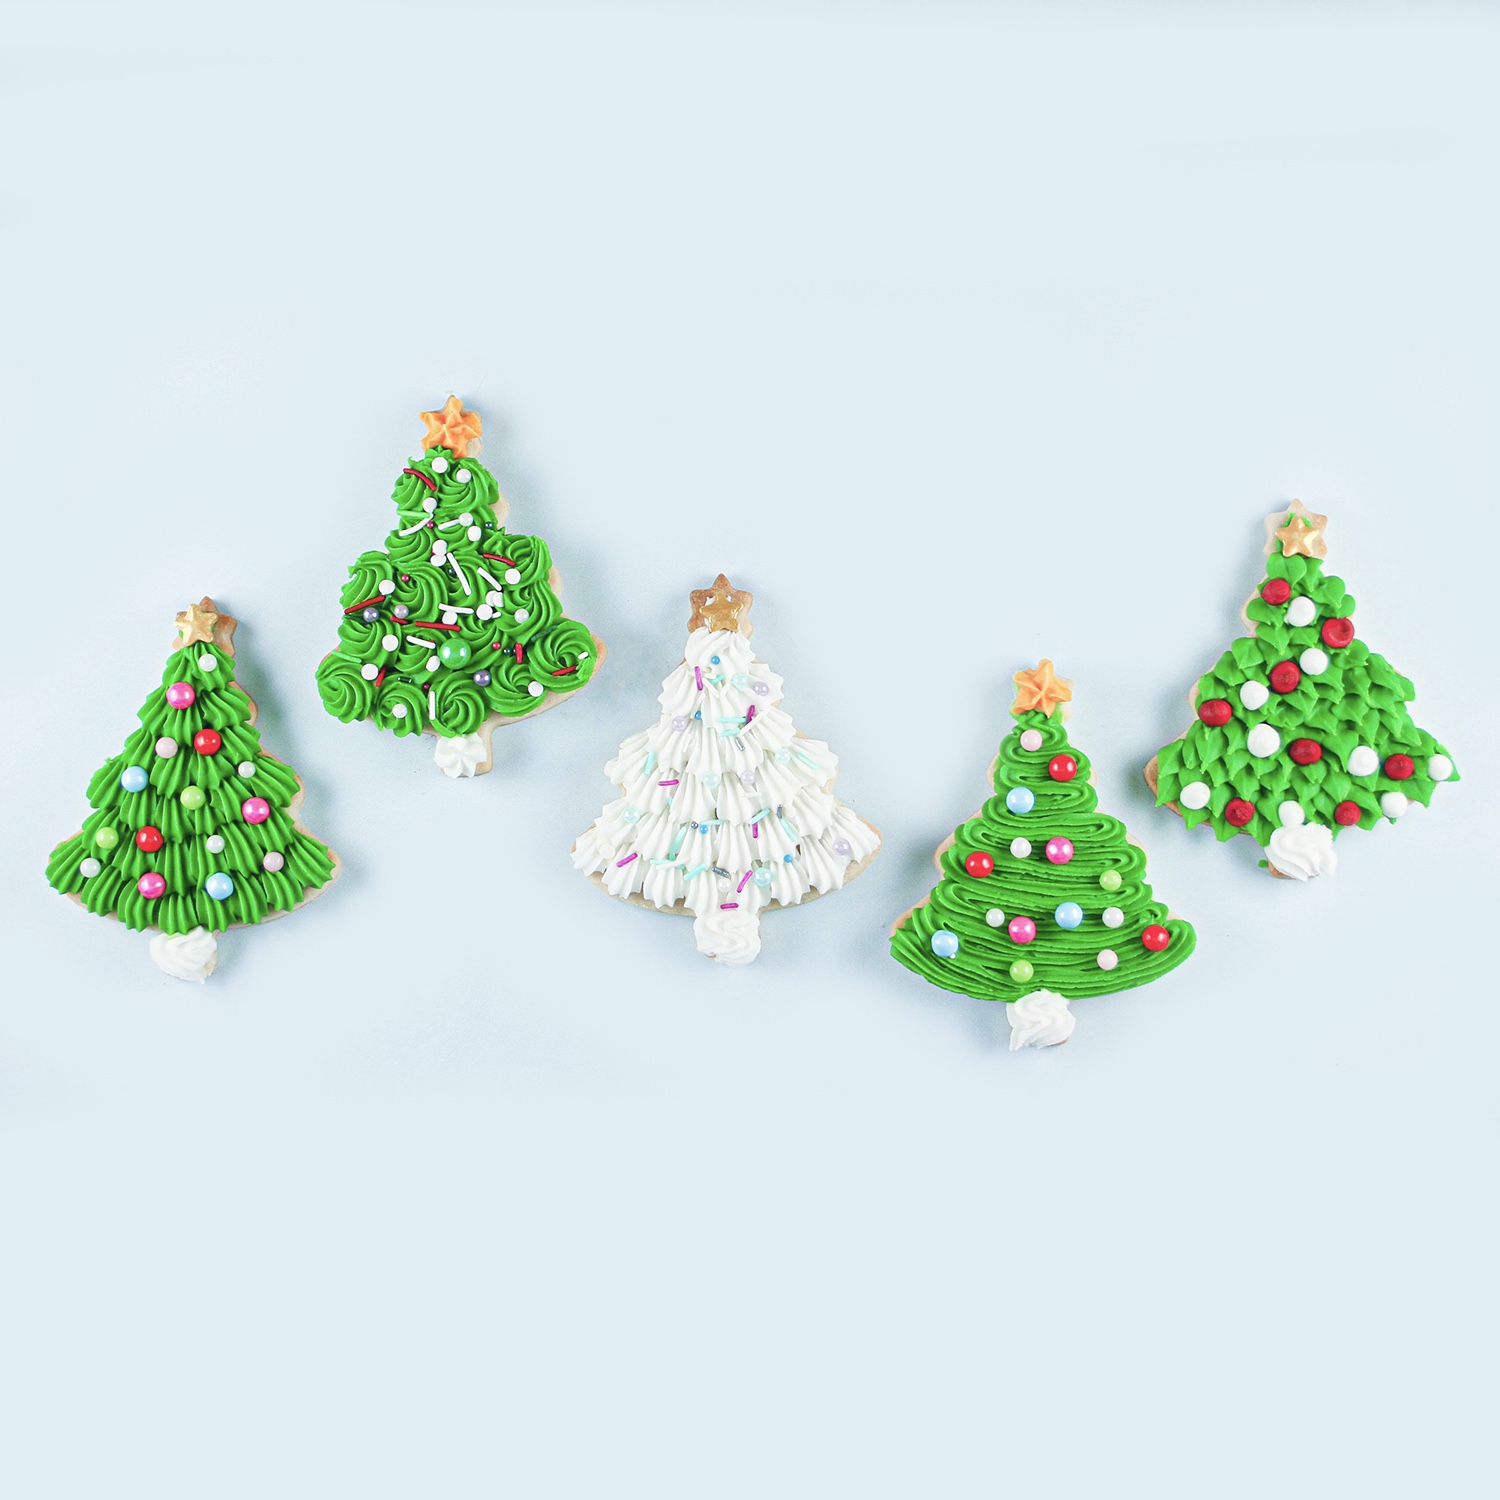 Christmas tree sugar cookies decoratd in buttercream using 4 different piping sytles with leaves, shells, rosettes and zigzags adorned with sprinkles and a star topping the trees.